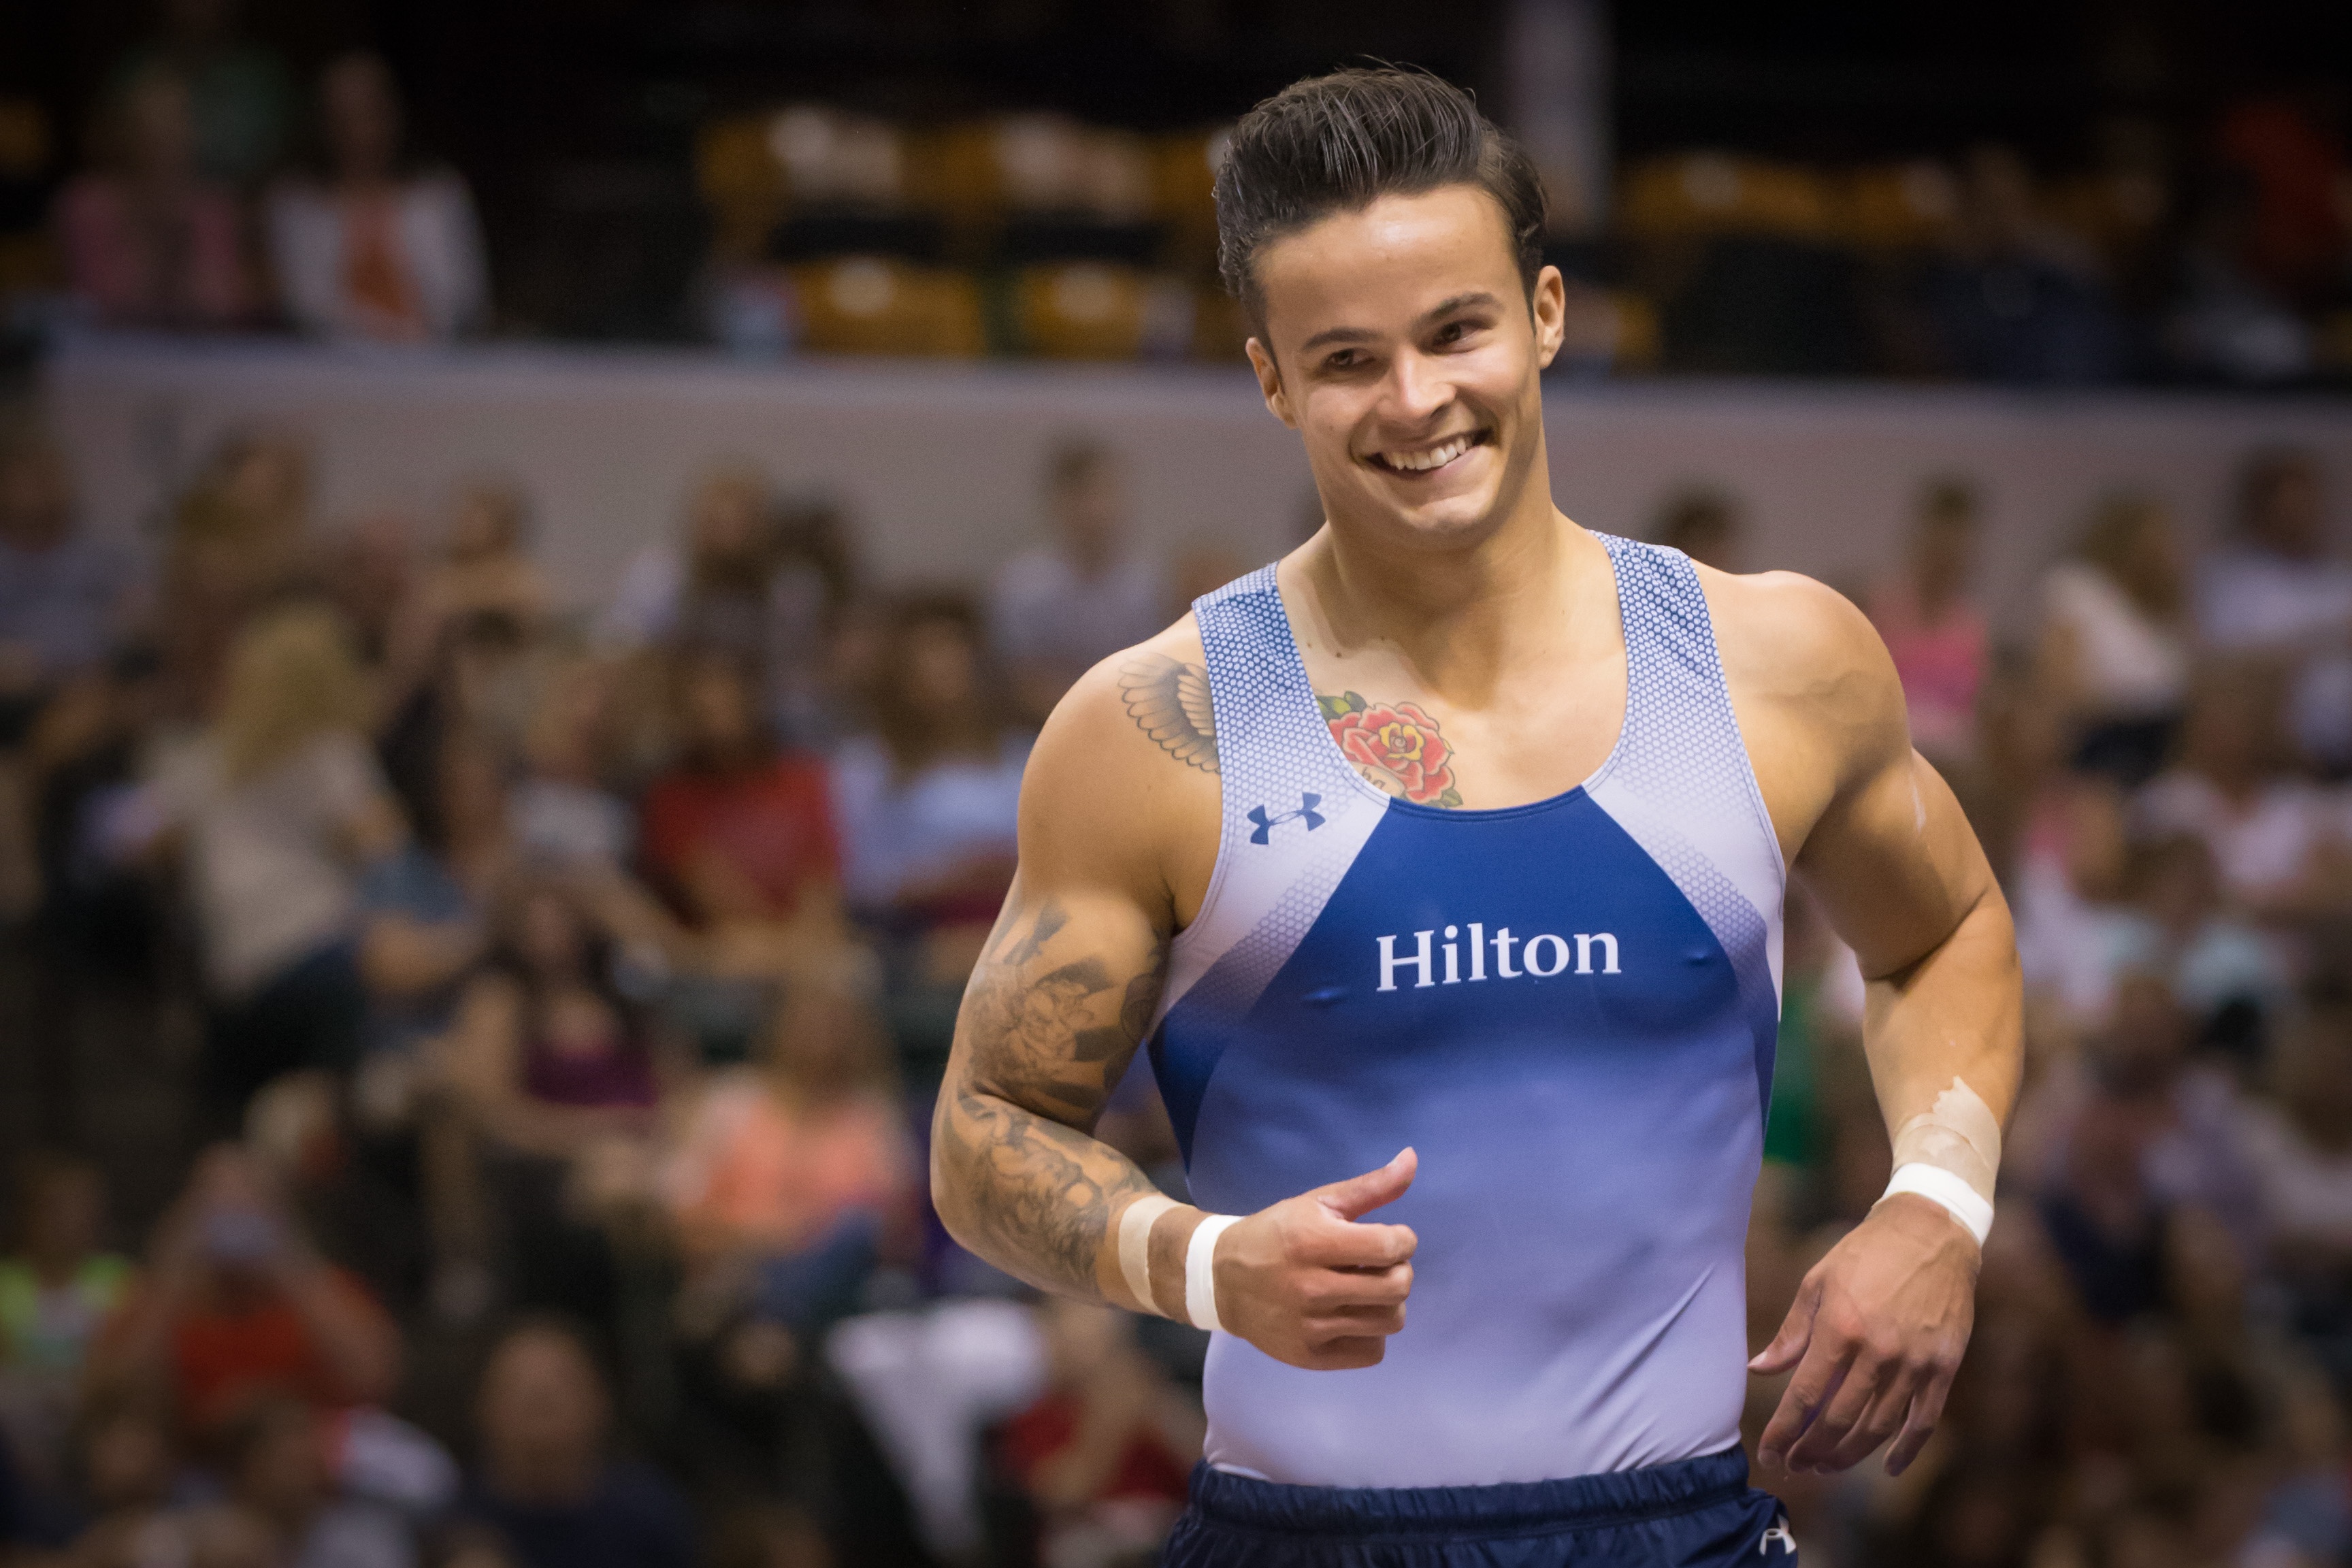 Top 10 Men's Photos From 2015 PG Championships - Gymnastike